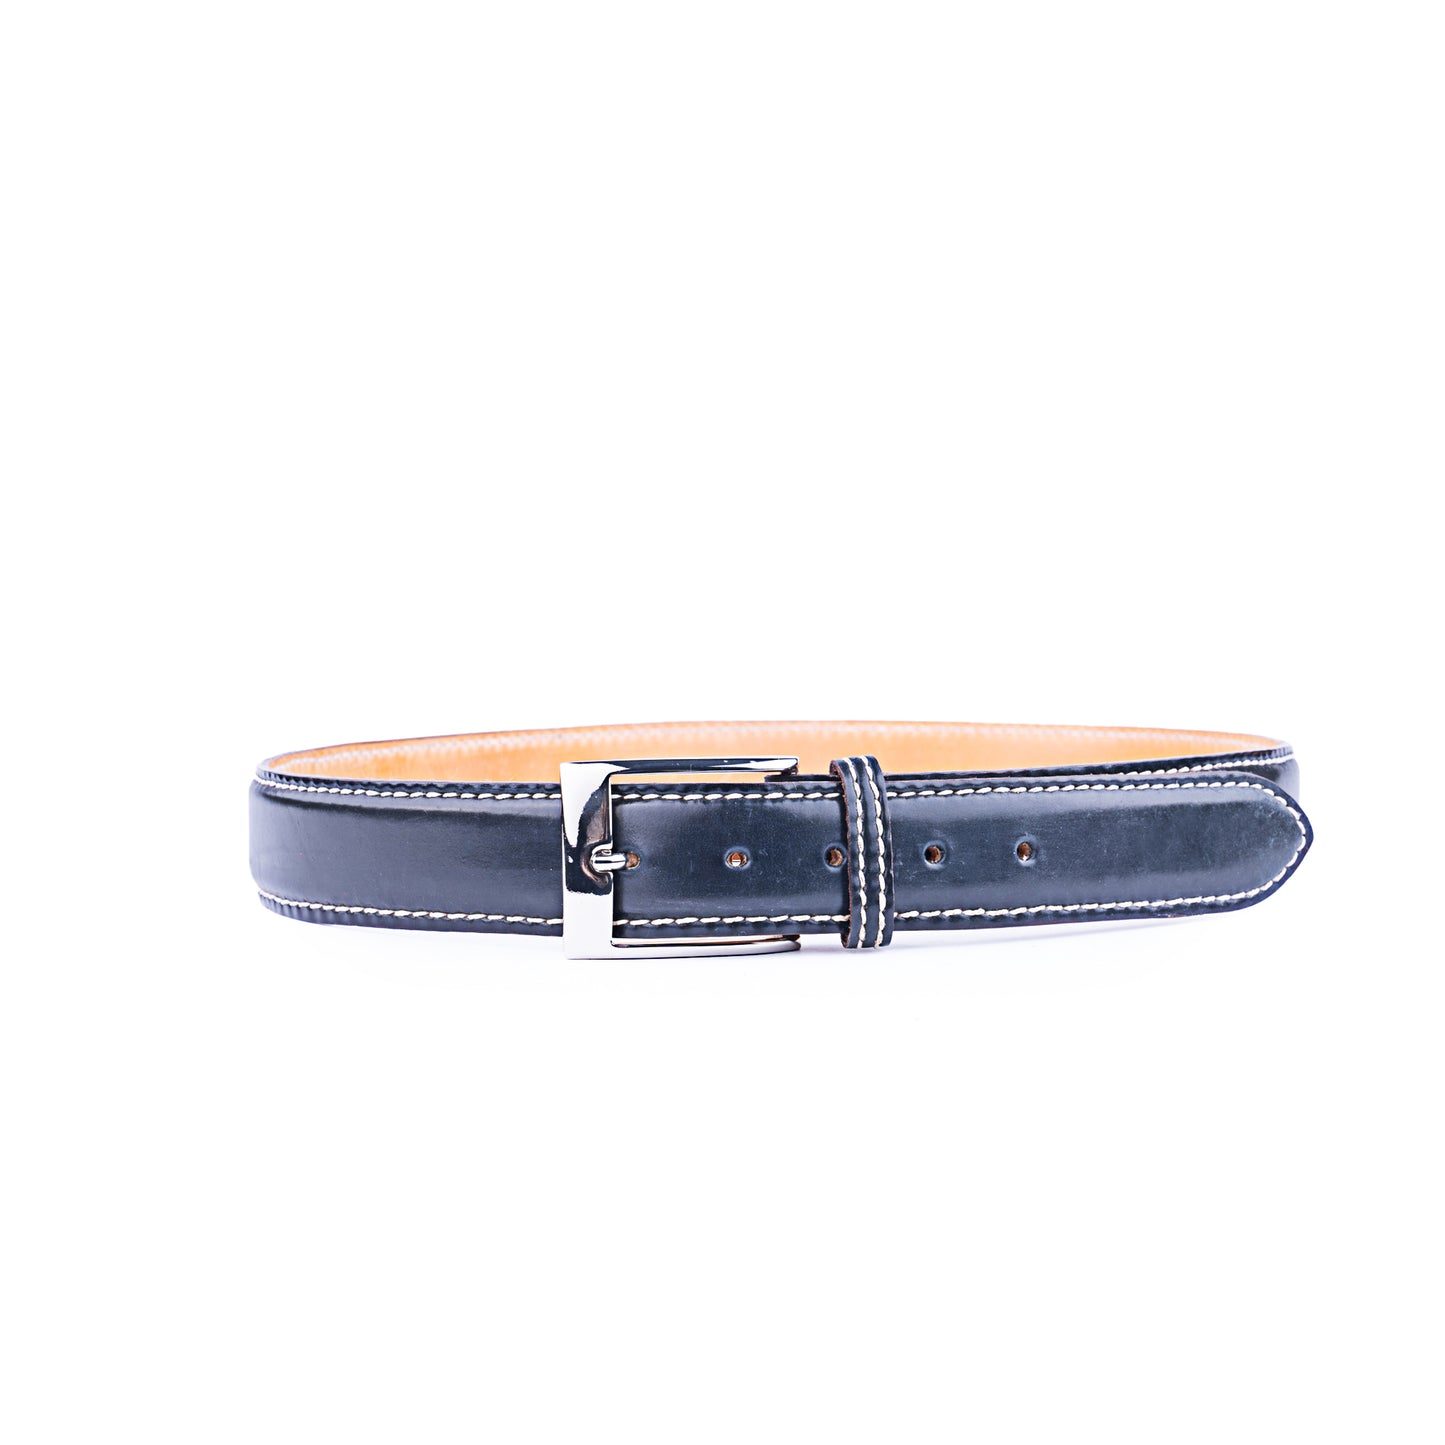 Dark Blue Cordovan leather Nickle Buckle Belt, with hand stitched edge